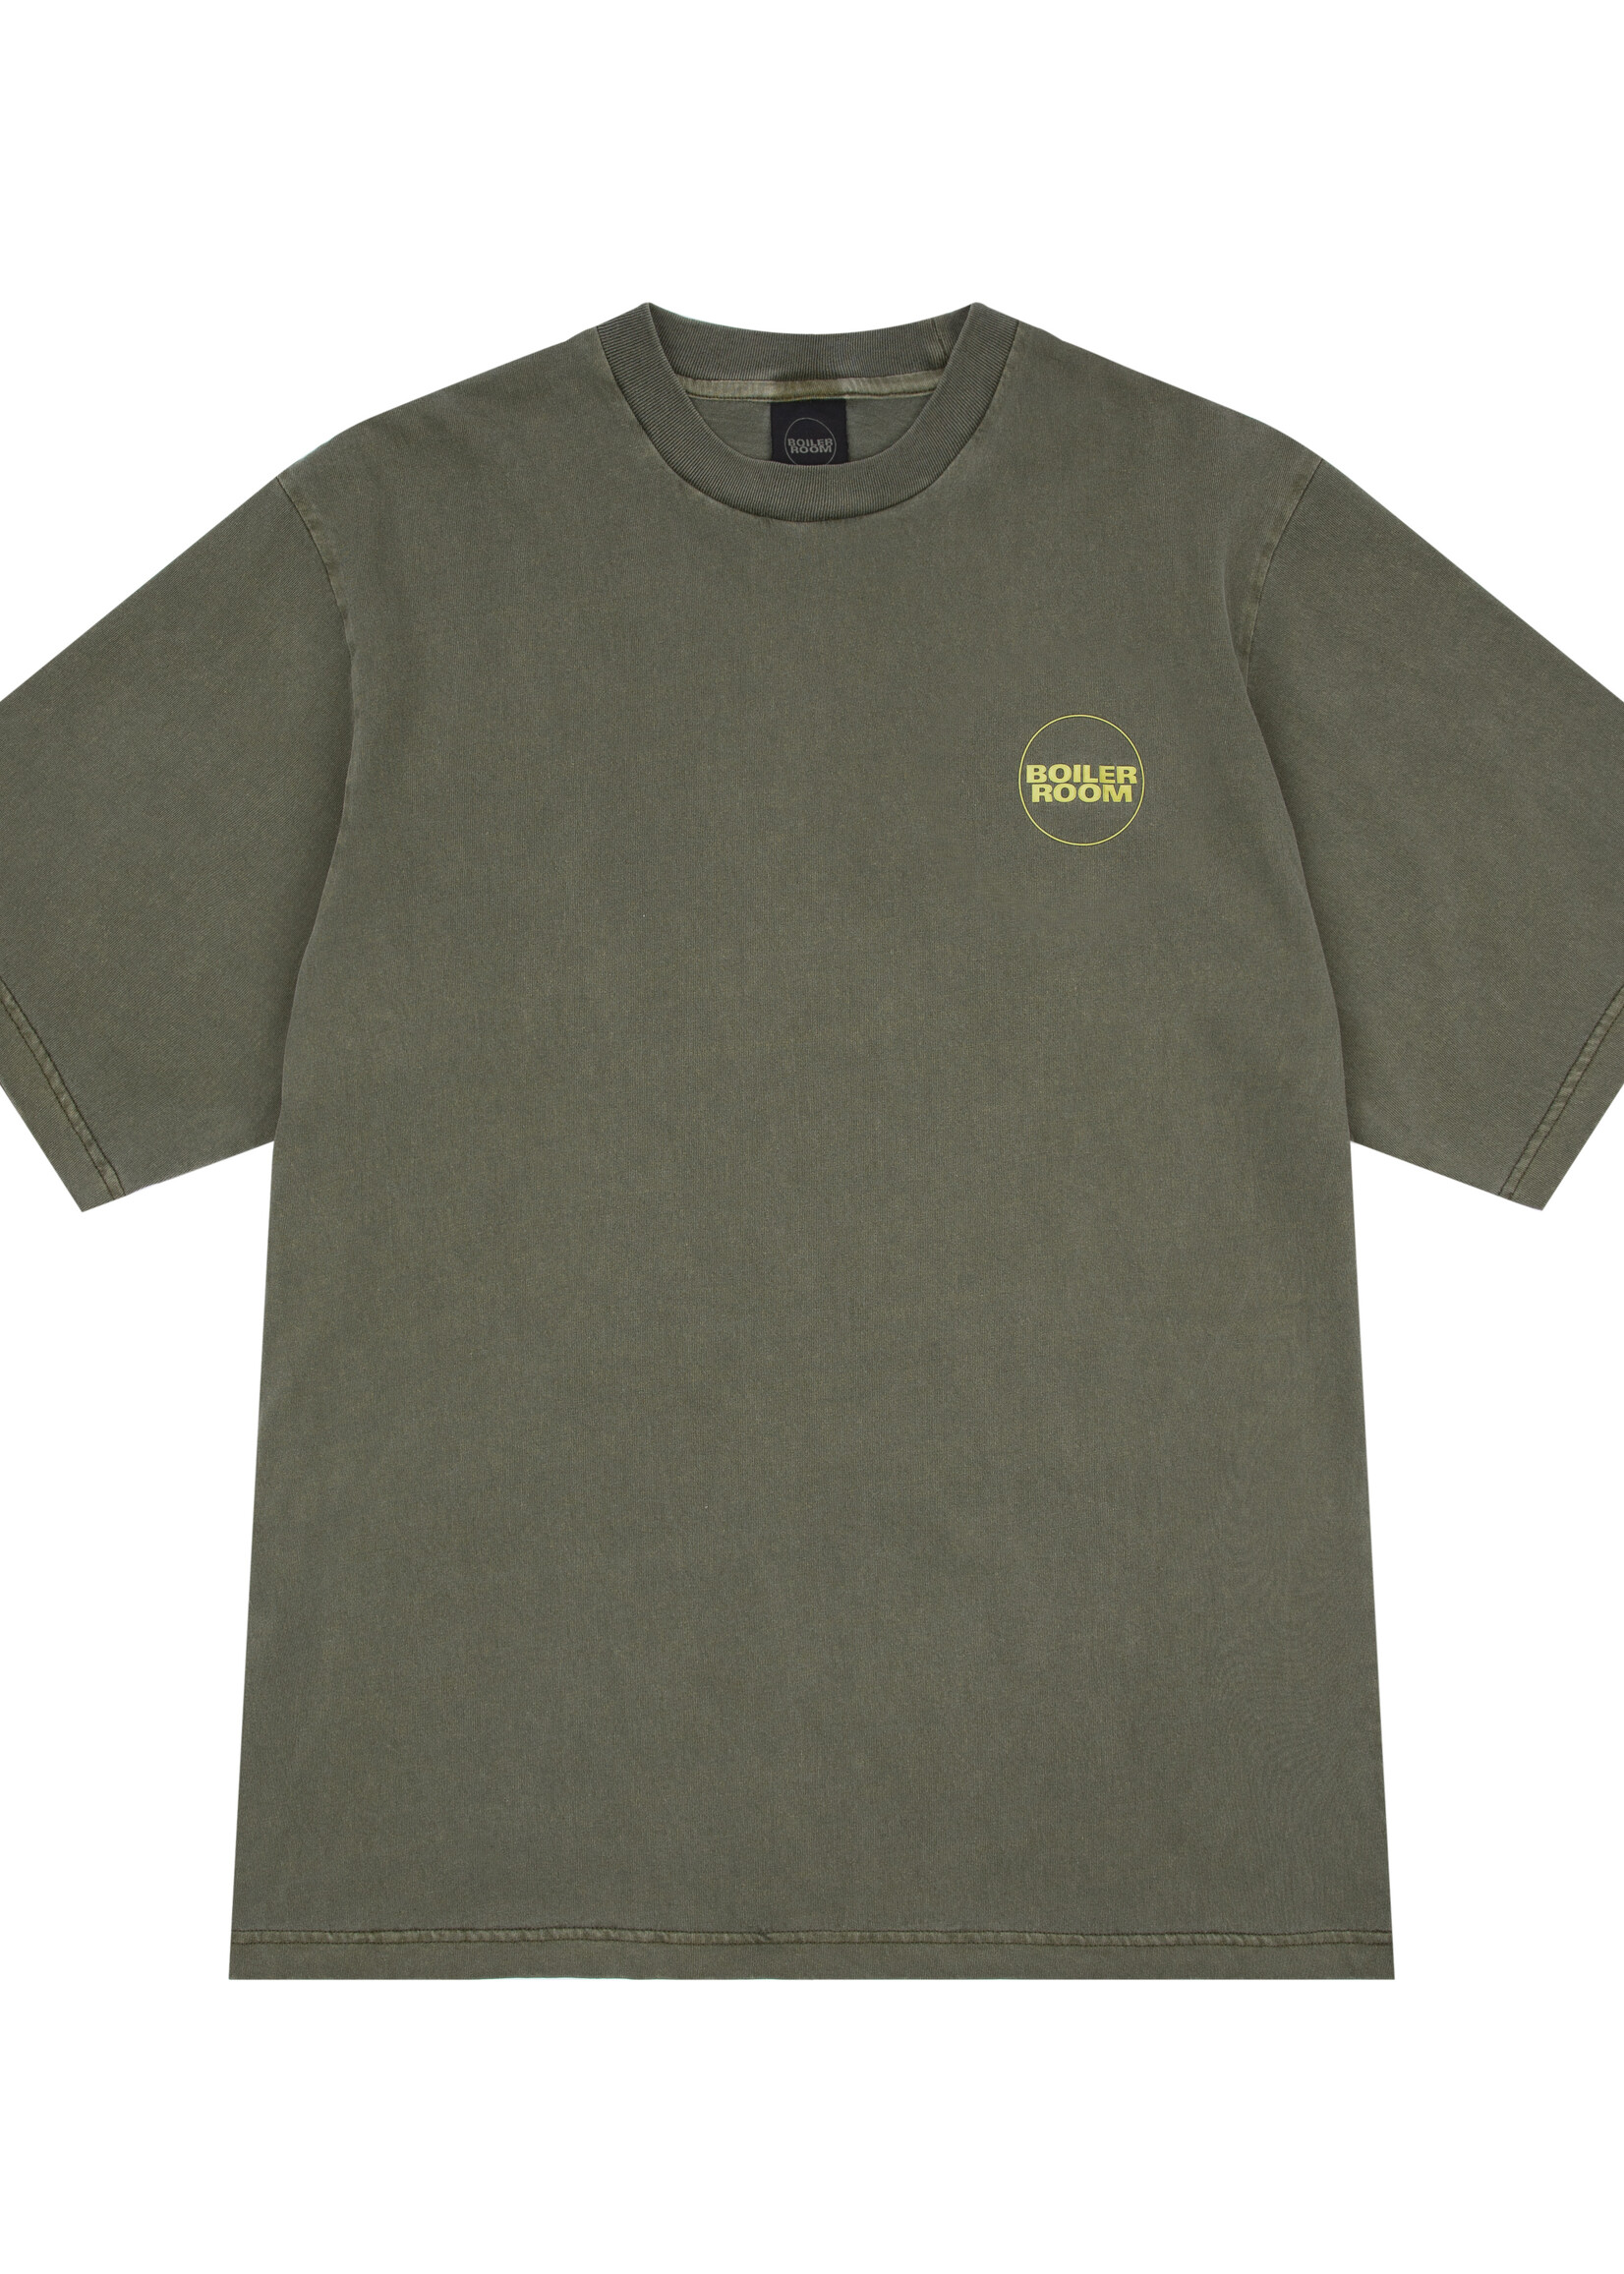 BOILER ROOM Core T-shirt in Olive